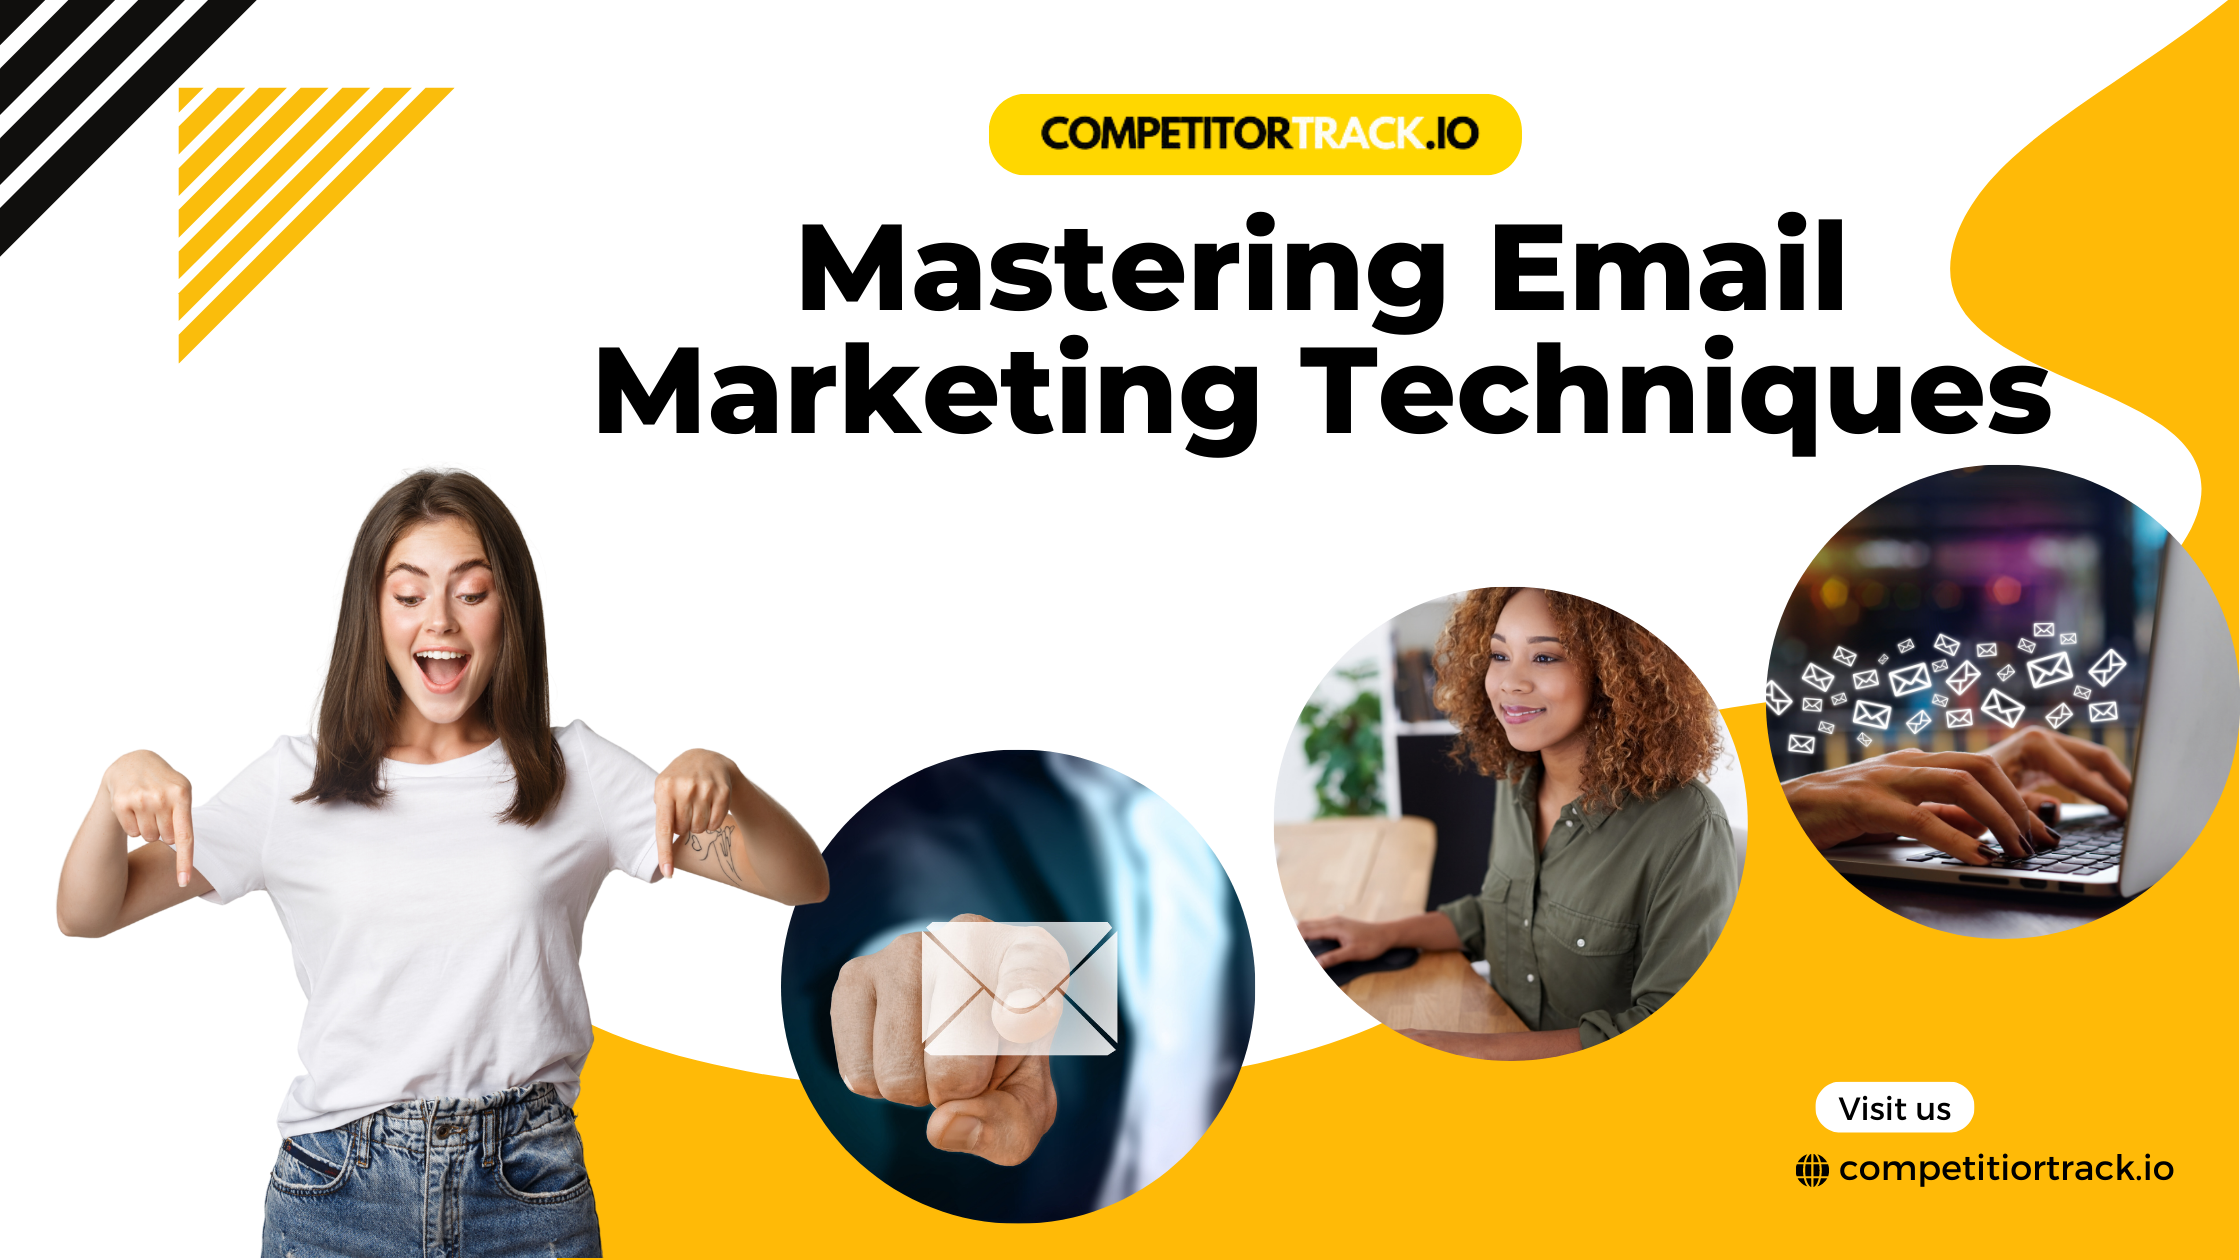 How the Masters are Mastering Email Marketing Techniques